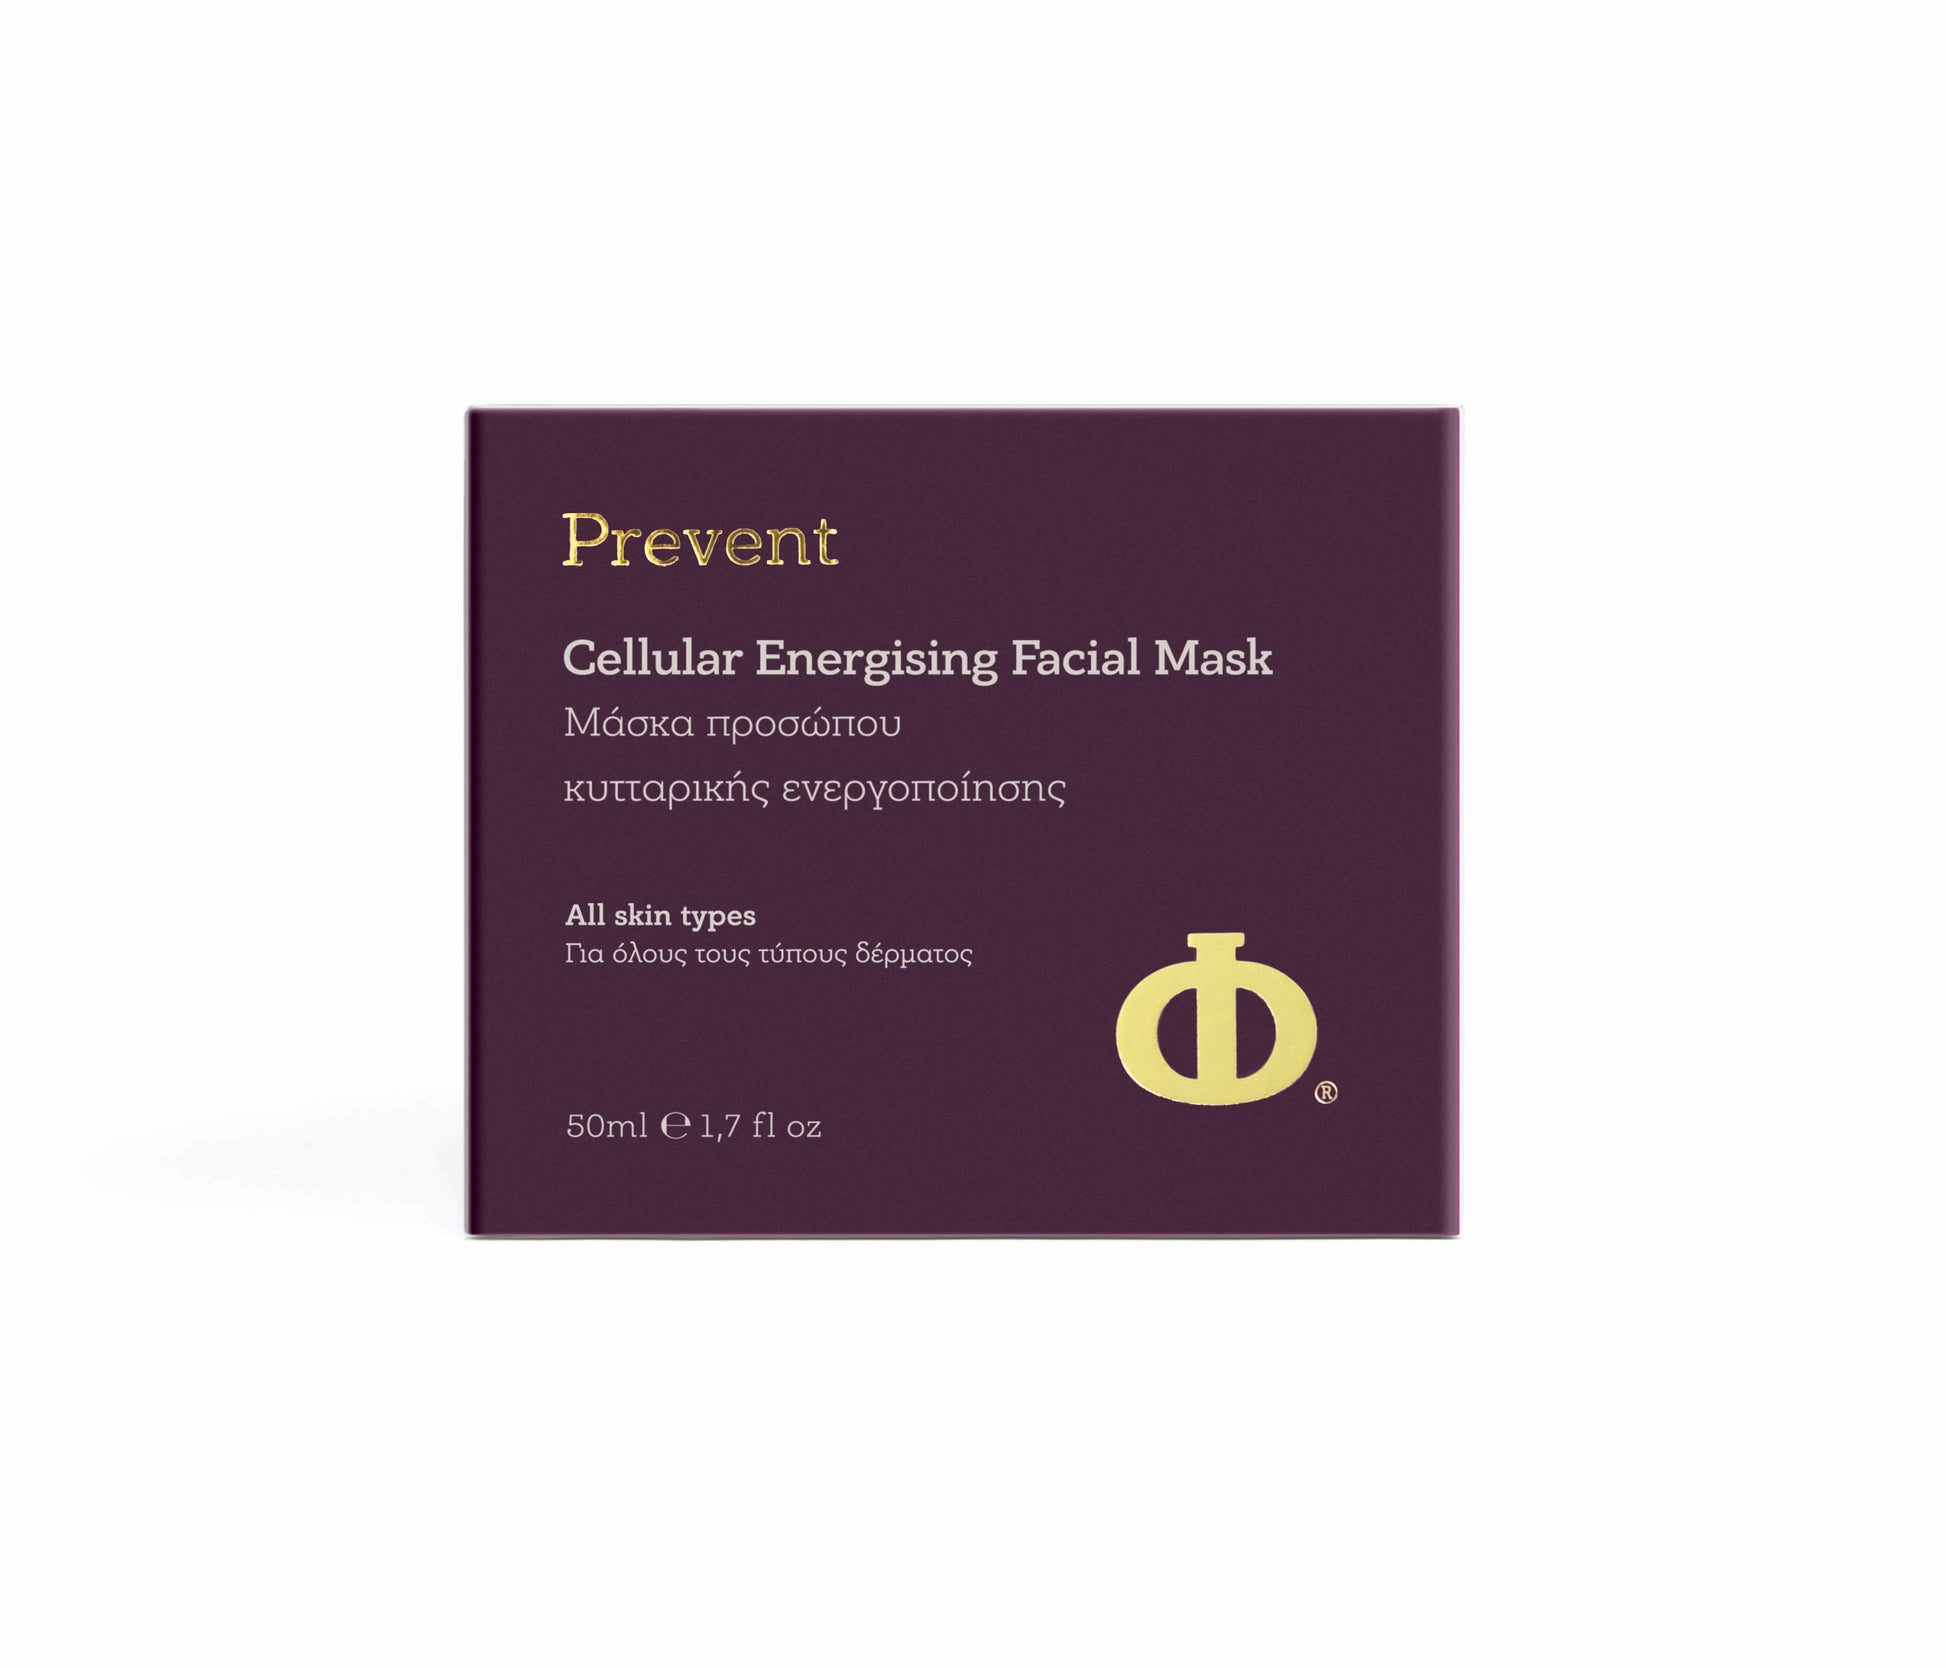 Philab Cellular Energising Mask packaging with purple background and gold logo.